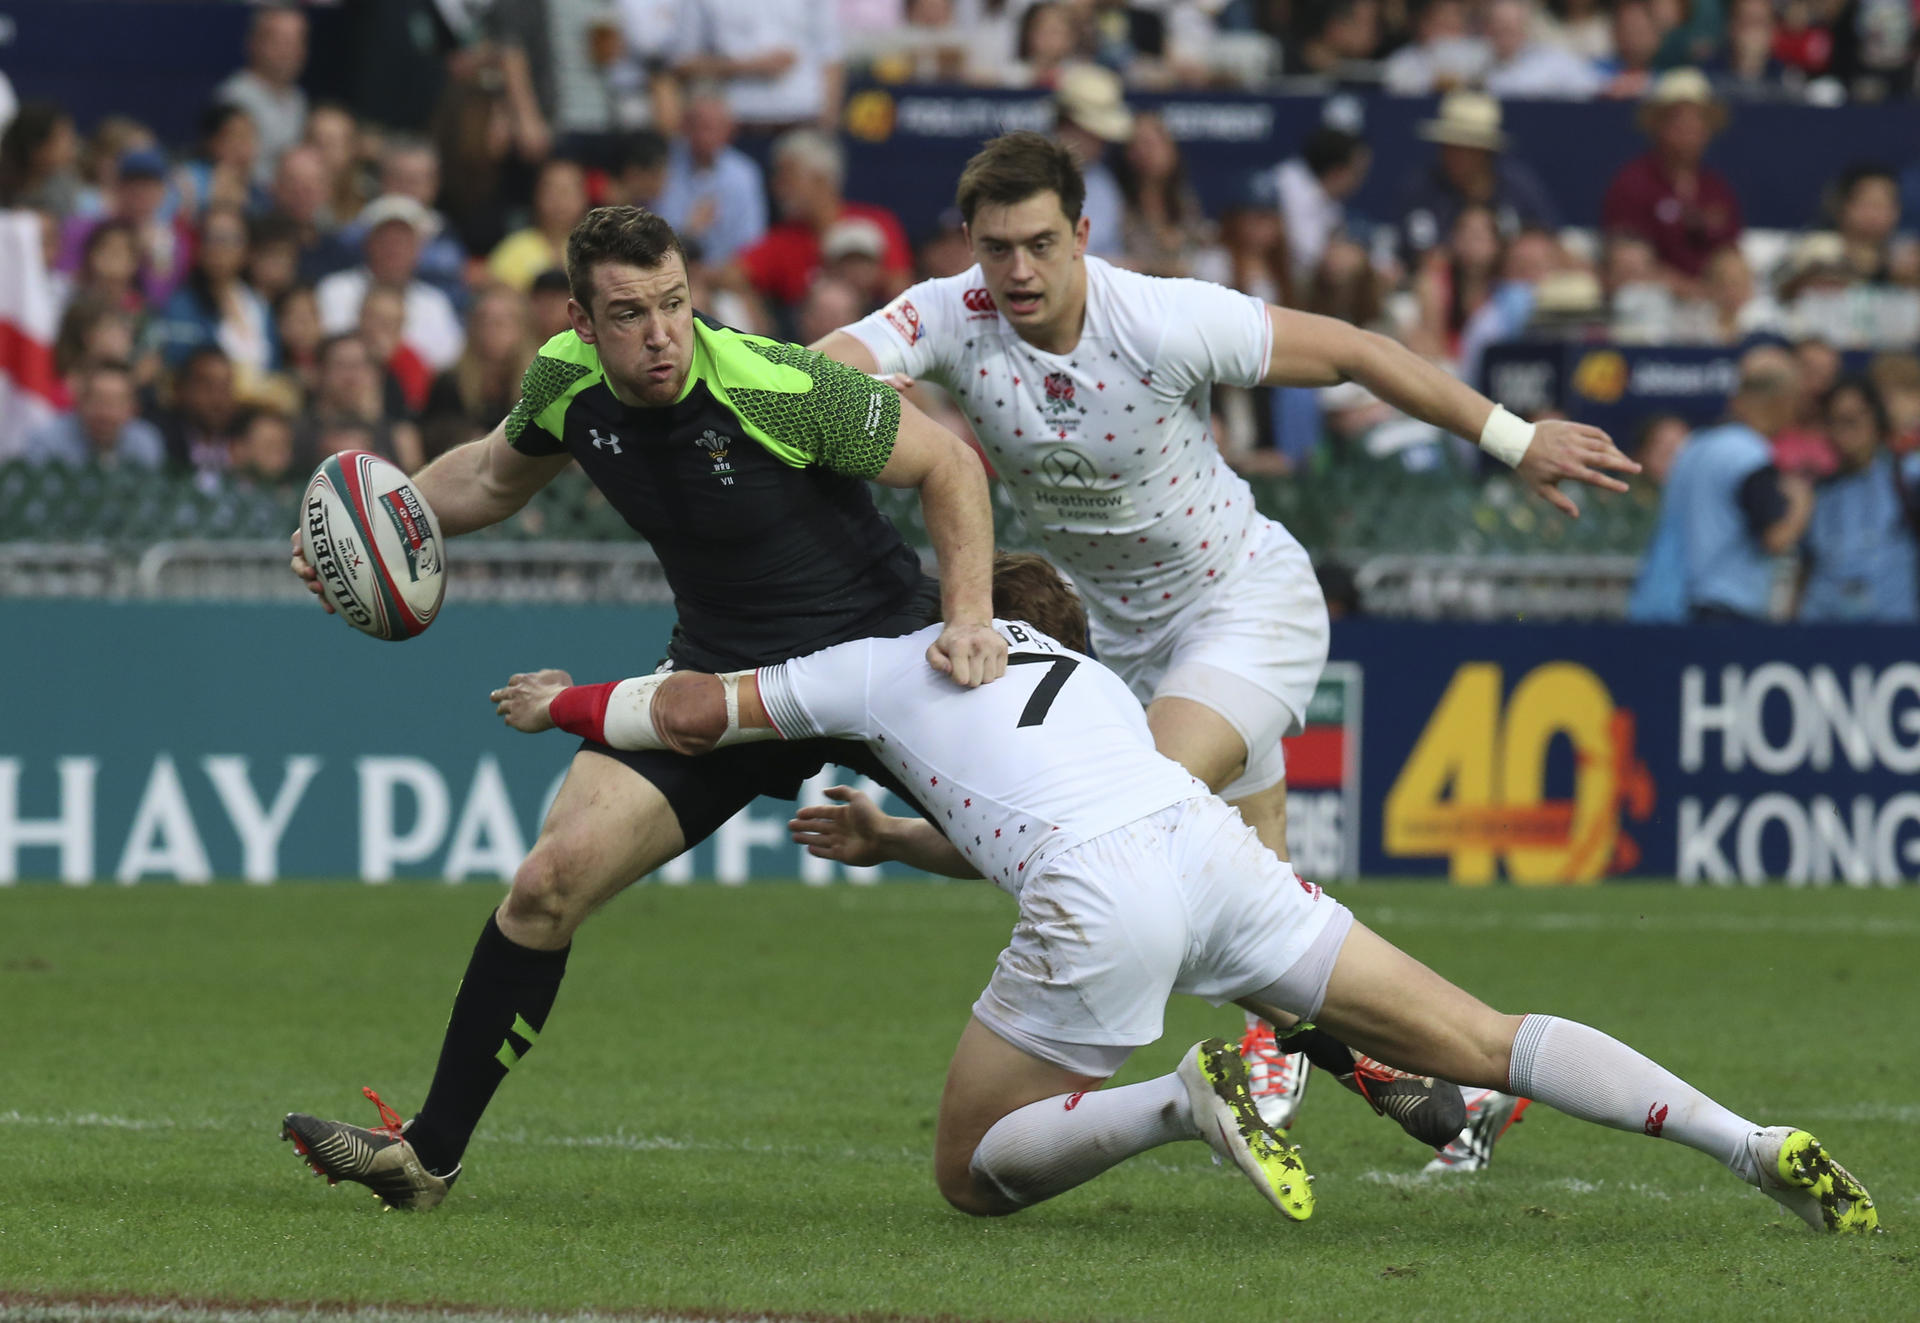 England's cover defence struggled with the Welsh speed during their 26-19 win. Photo: KY Cheng/SCMP